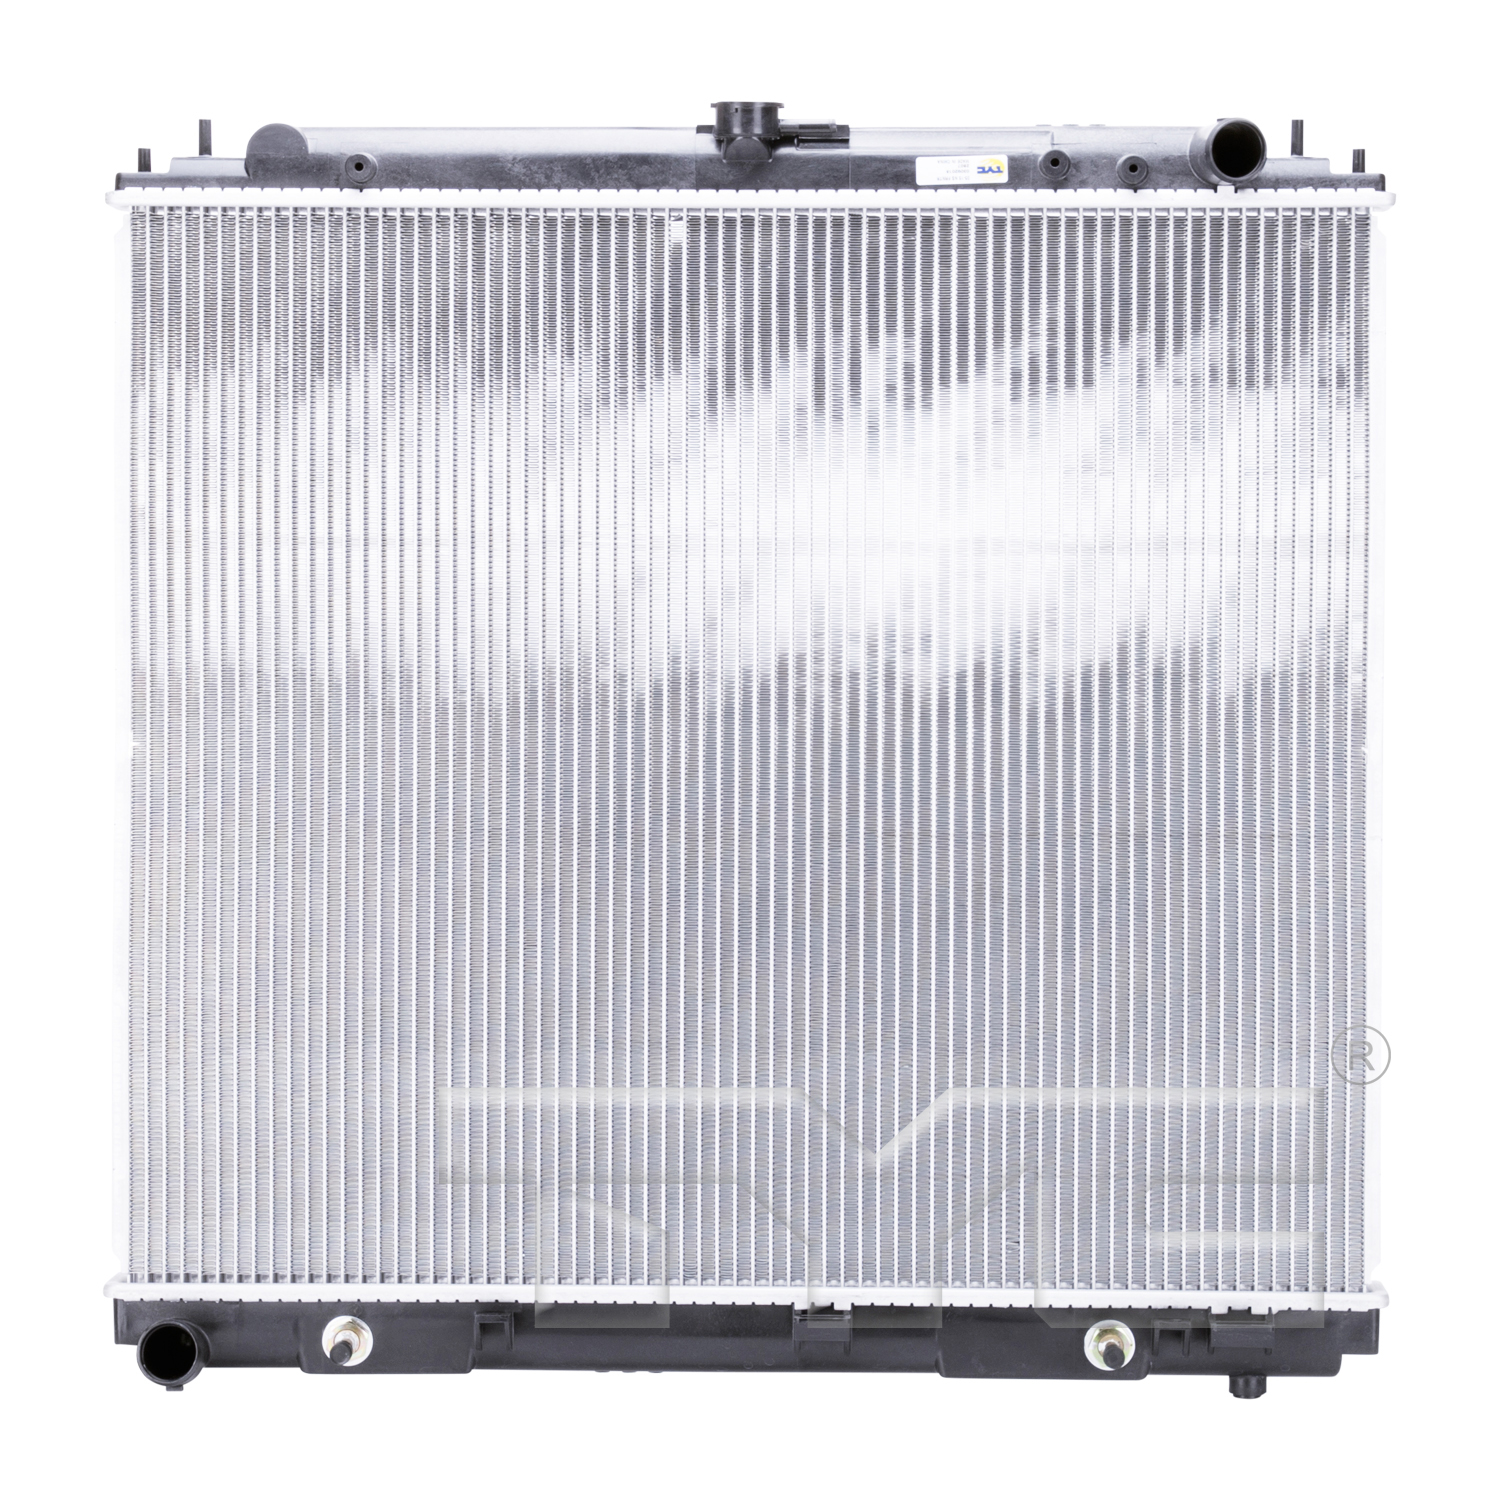 Aftermarket RADIATORS for NISSAN - FRONTIER, FRONTIER,05-10,Radiator assembly